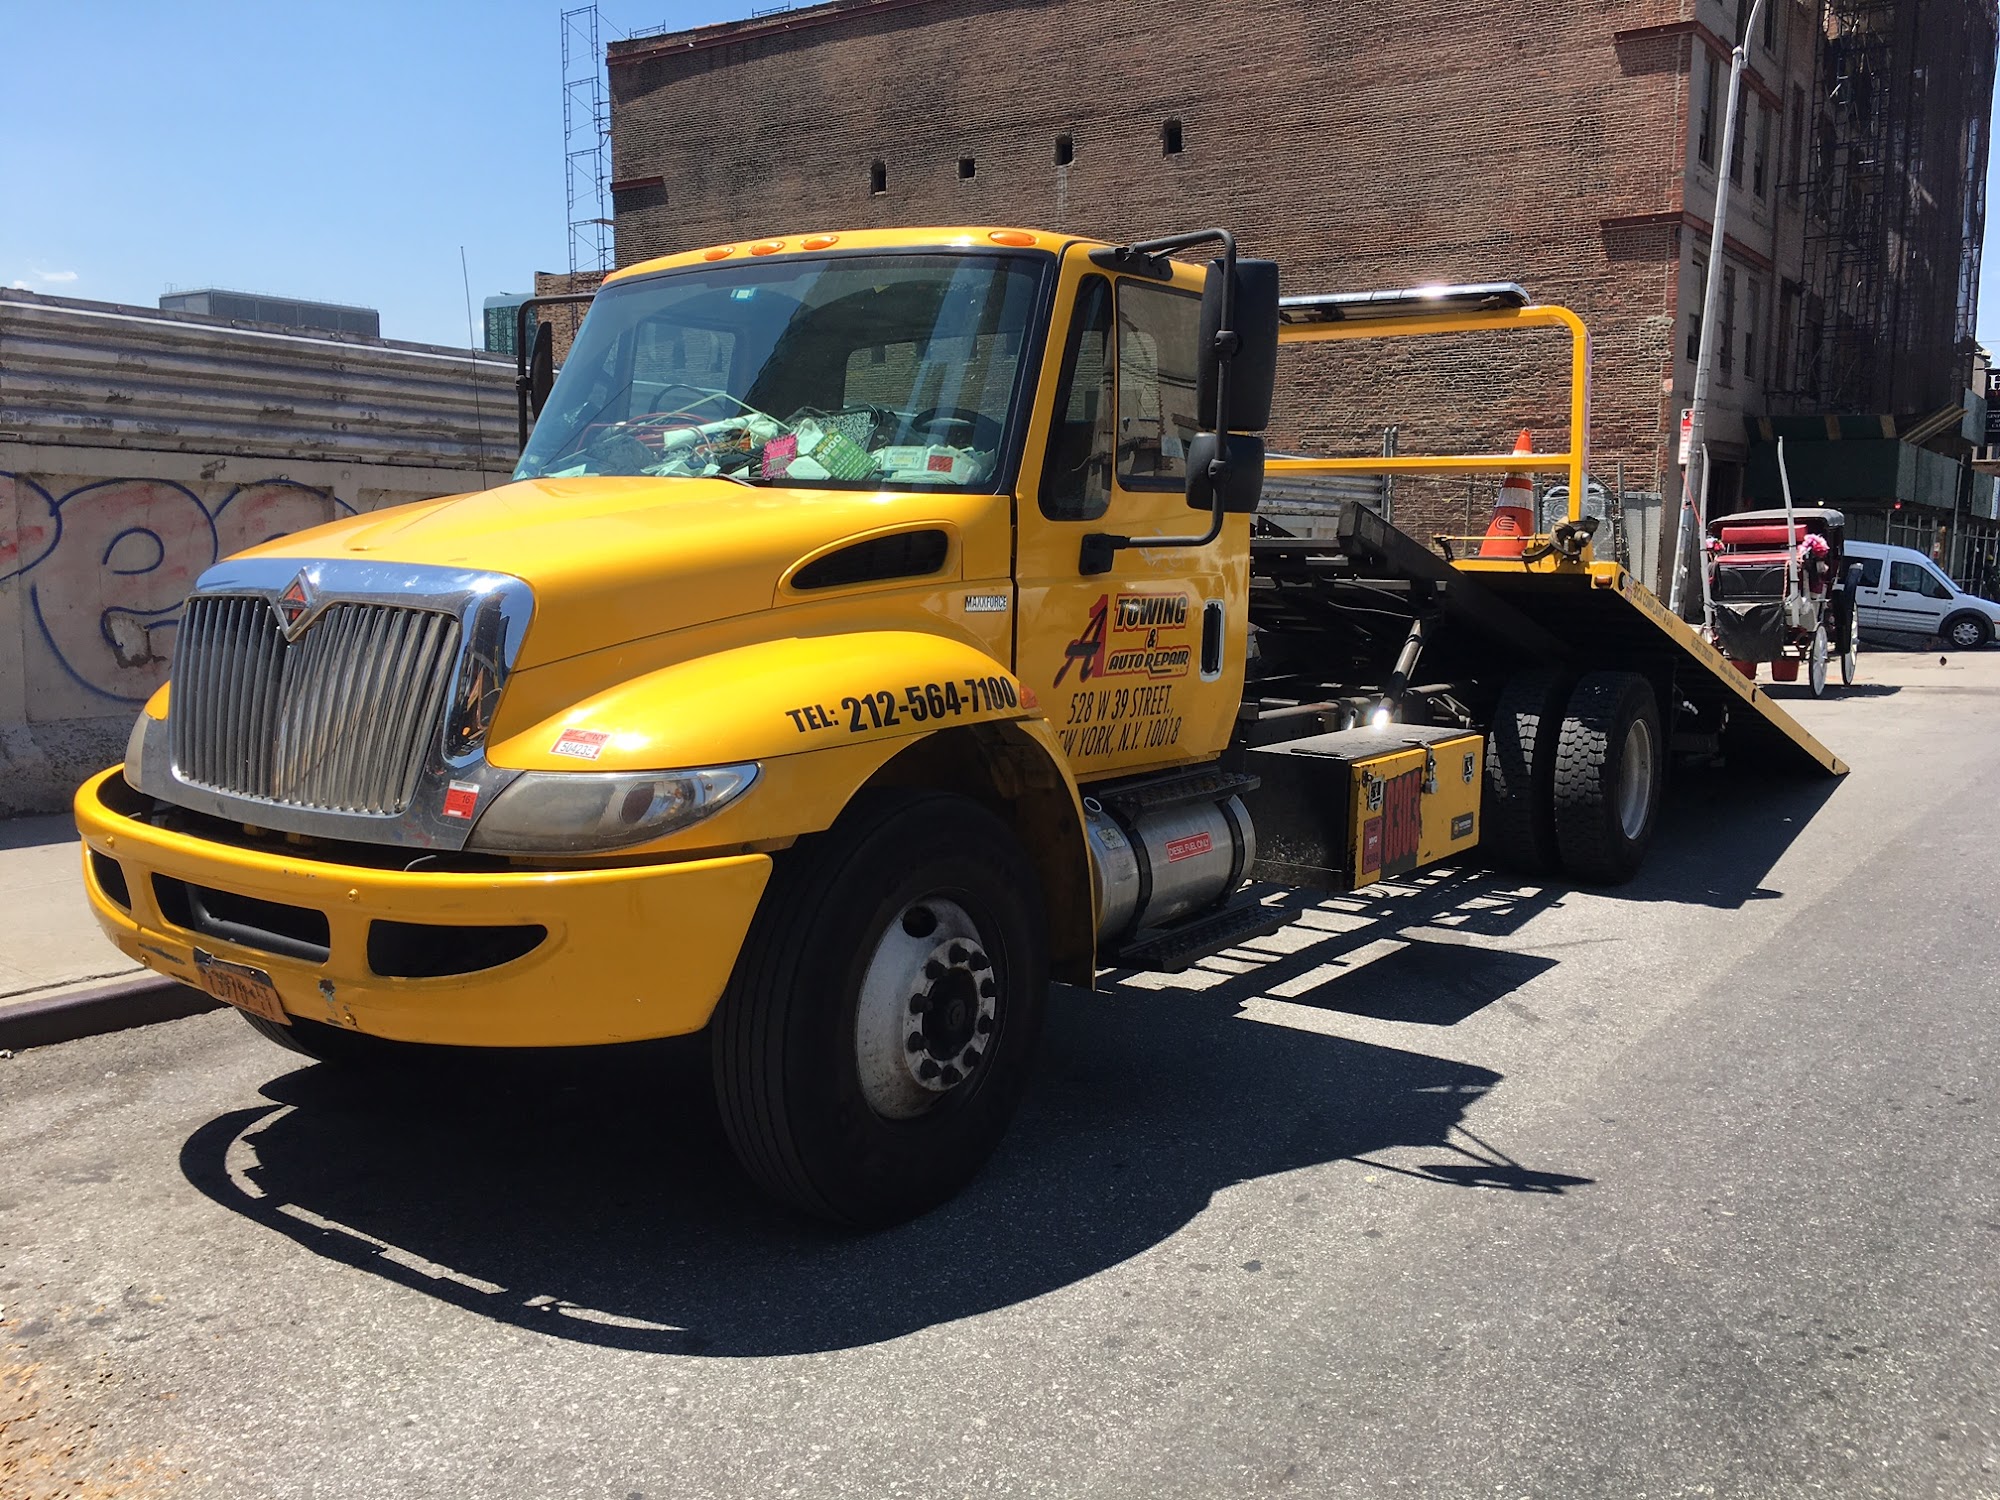 A1 Towing NYC